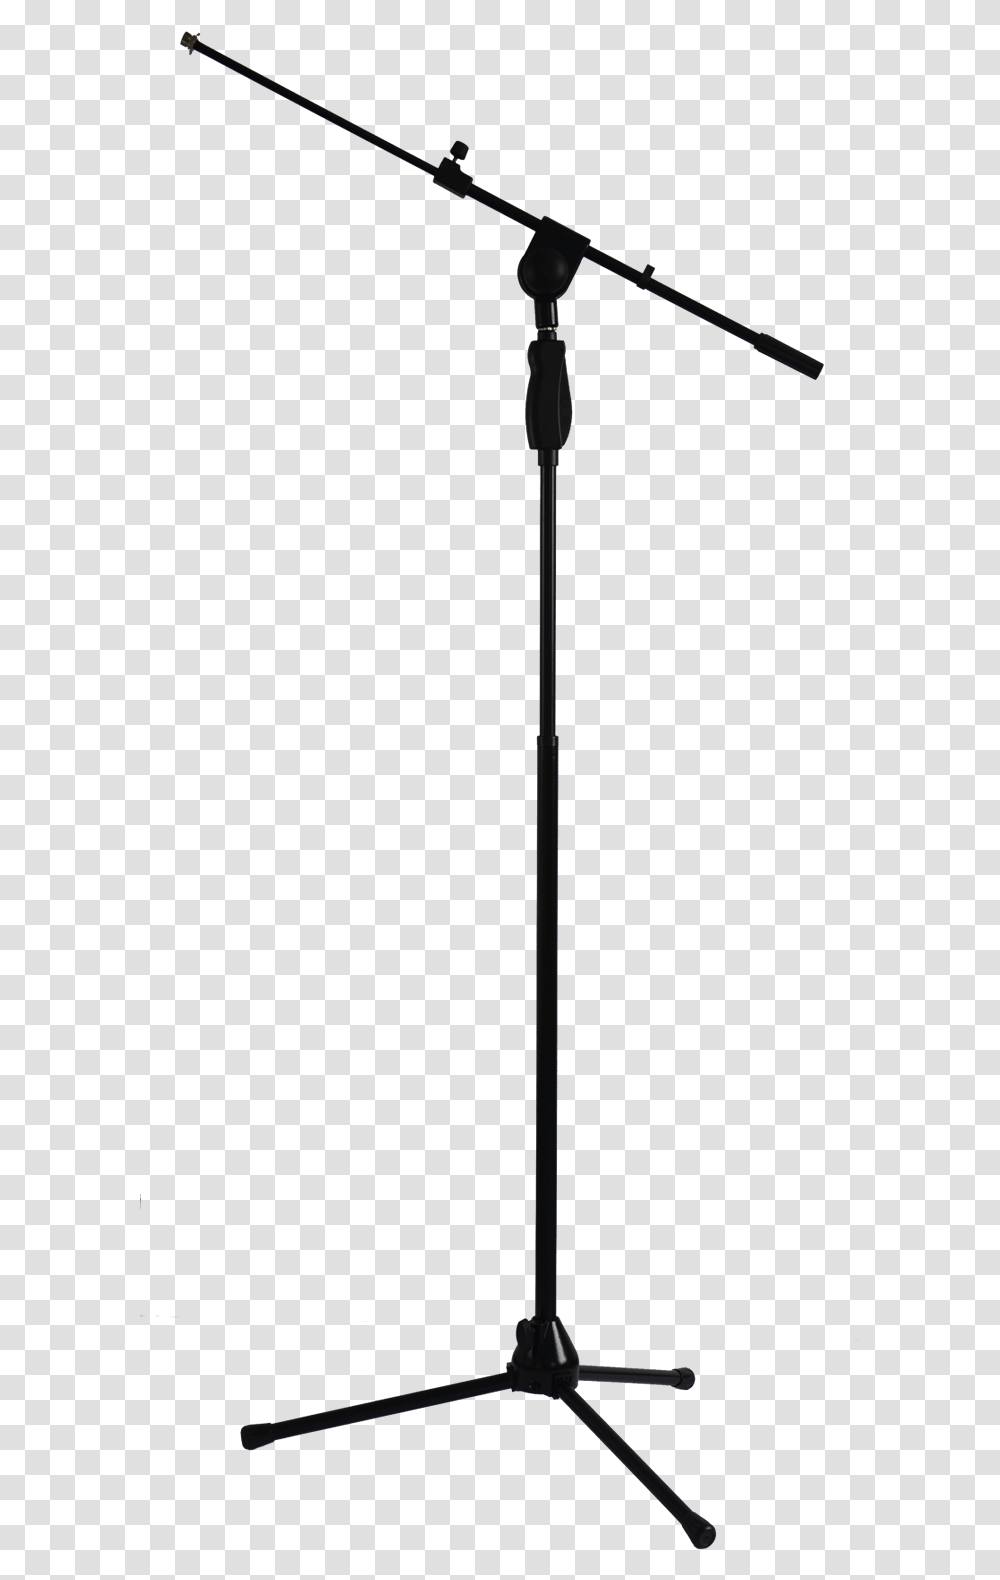 Microphone, Lamp Post, Sword, Blade, Weapon Transparent Png